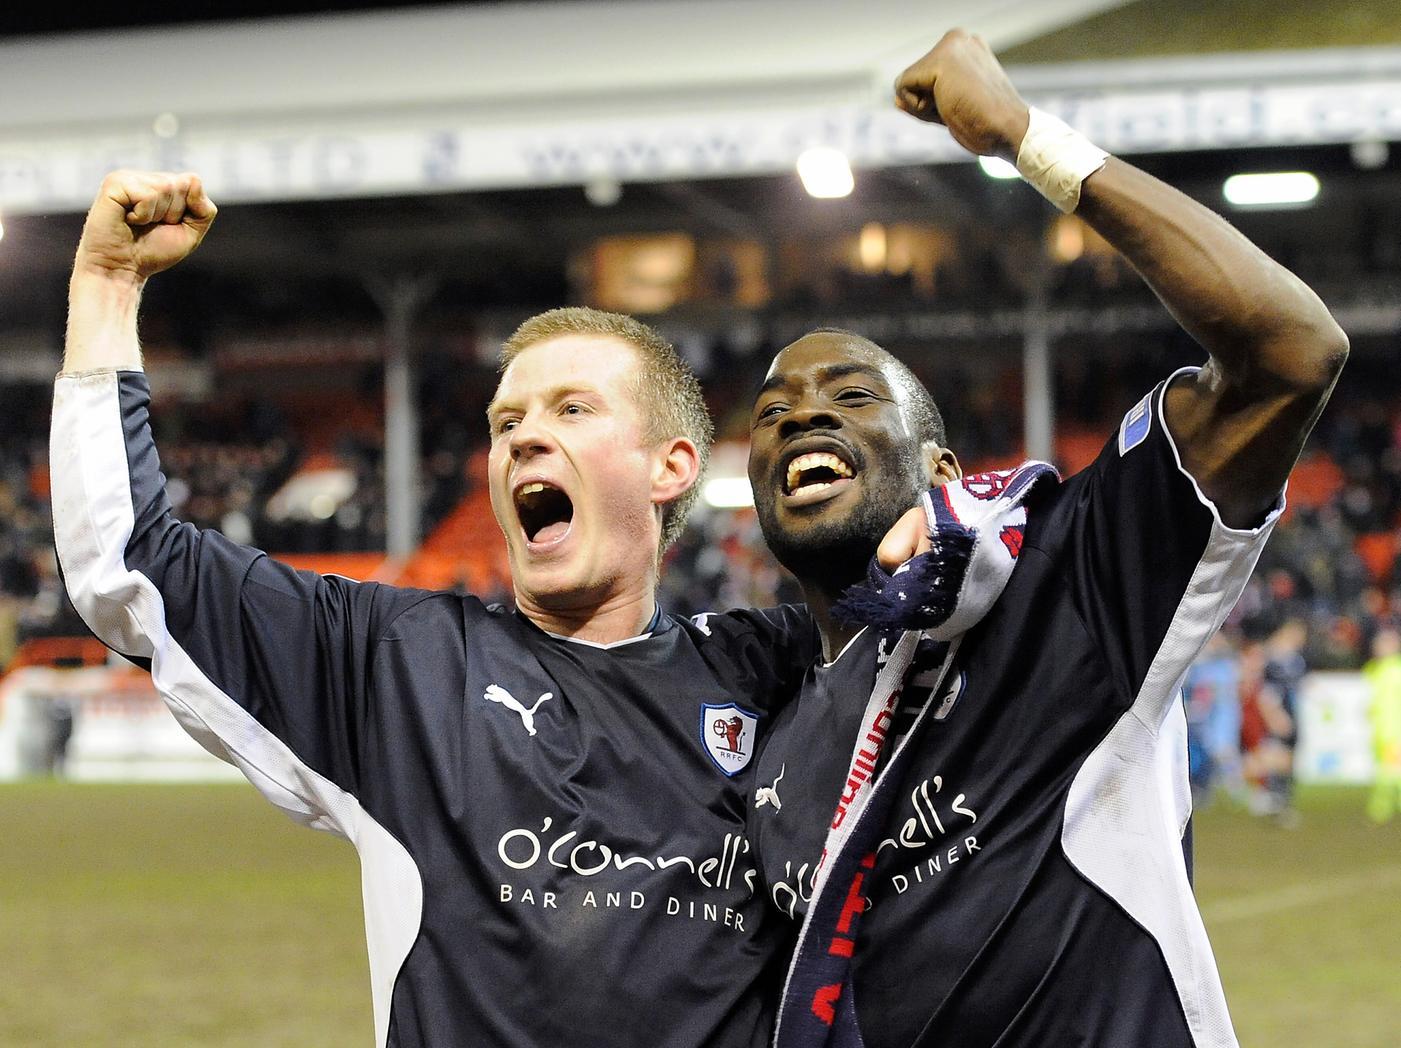 Robert Sloan and Gregory Tade celebrate at full-time.